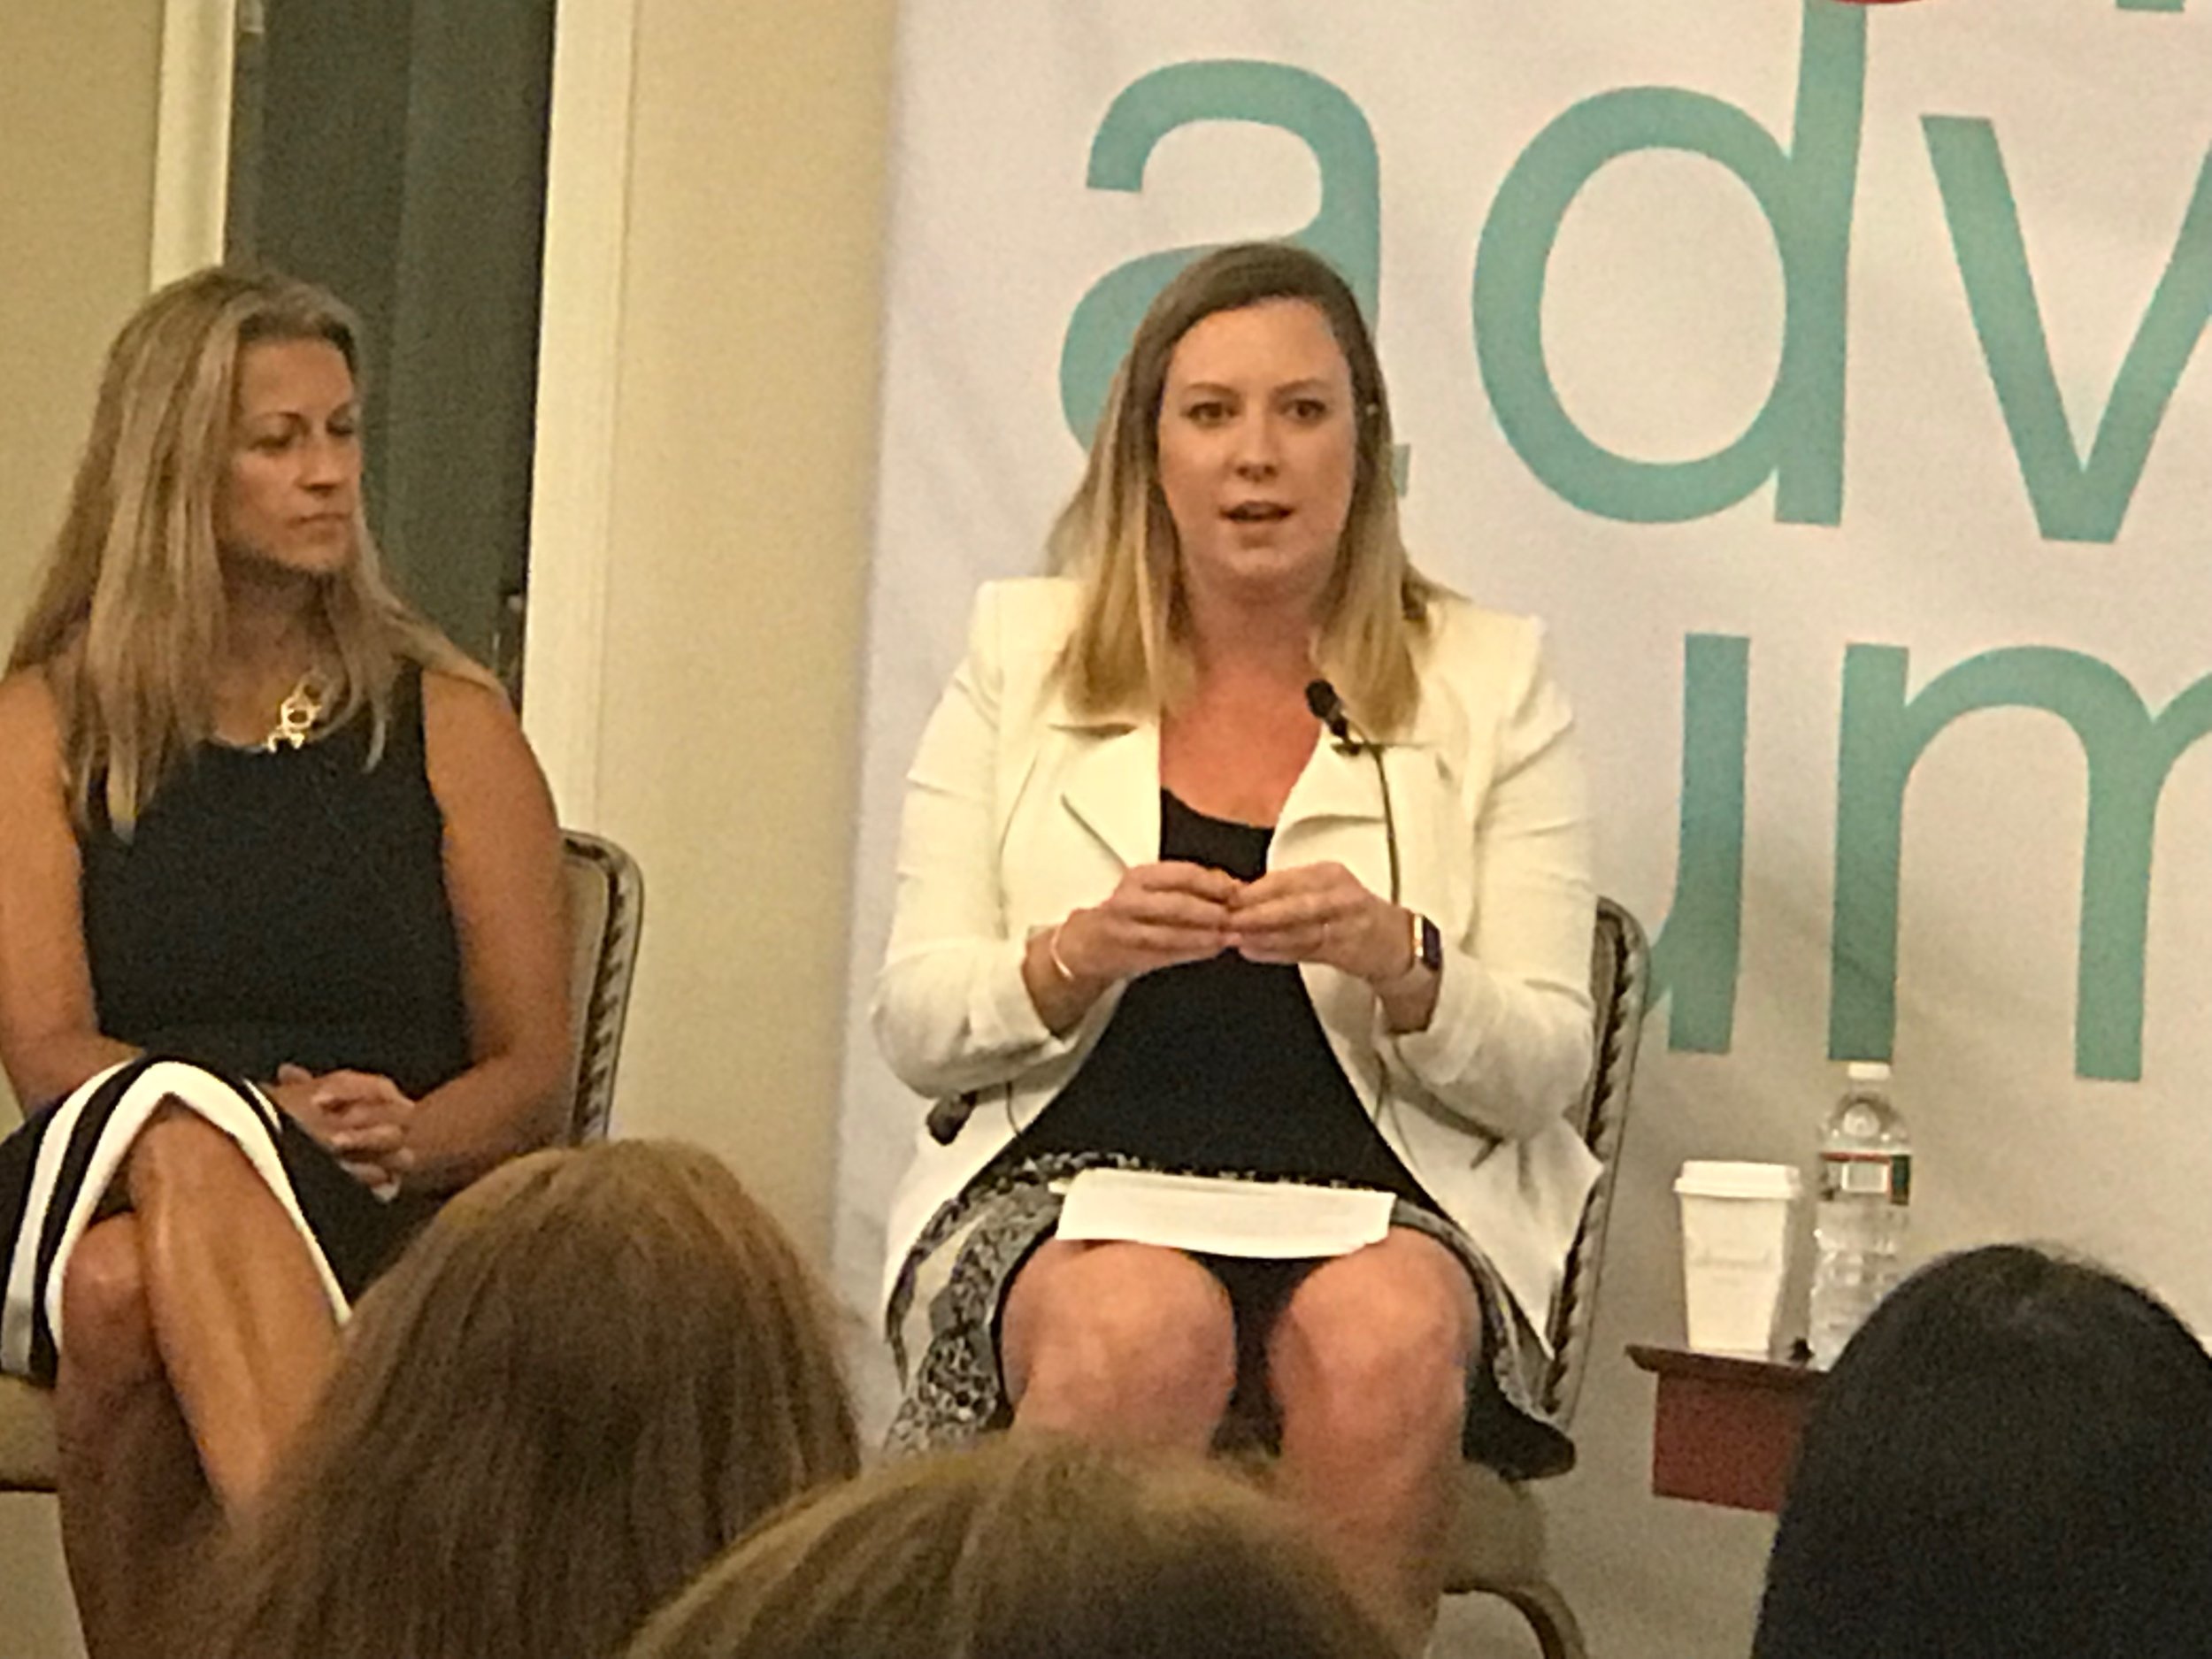  Cofounder of The W Source™ Hannah Buschbom (right) discussing business growth strategies on panel with Jennifer Baccarela (left) at the InvestmentNews Women Adviser Summit in Boston, MA. 